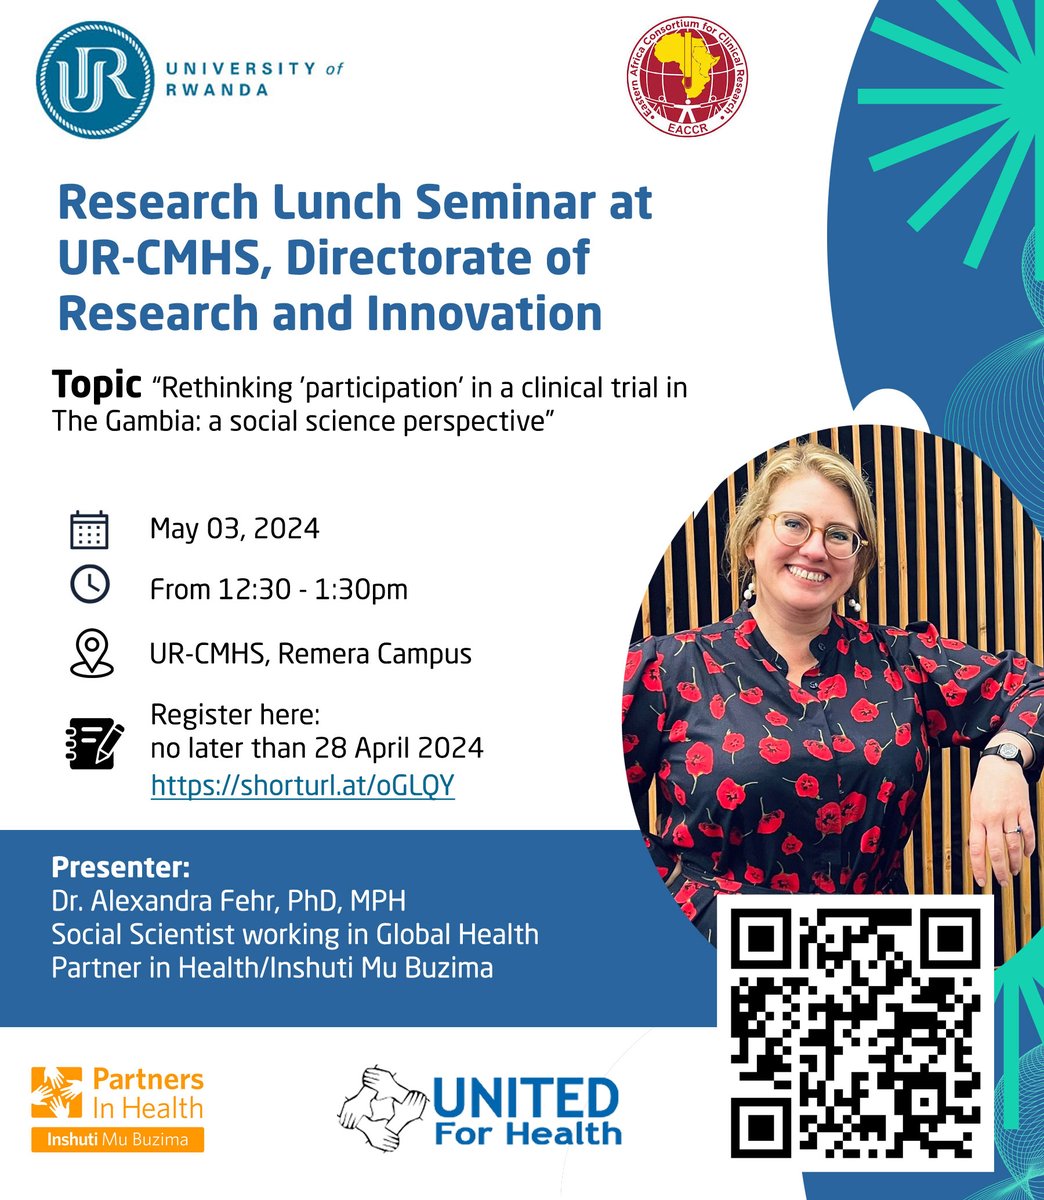 Research Lunch Seminar at UR-@UCmhs, Directorate of Research and Innovation on May 03, 2024, from 12:30 - 1:30pm at UR-CMHS, Remera Campus. Presented by @alexandra_fehr DON'T MISS REGISTER TODAY shorturl.at/oGLQY @ughe_org @PIH_Rwanda @RBCRwanda @alineuwimana @Uni_Rwanda